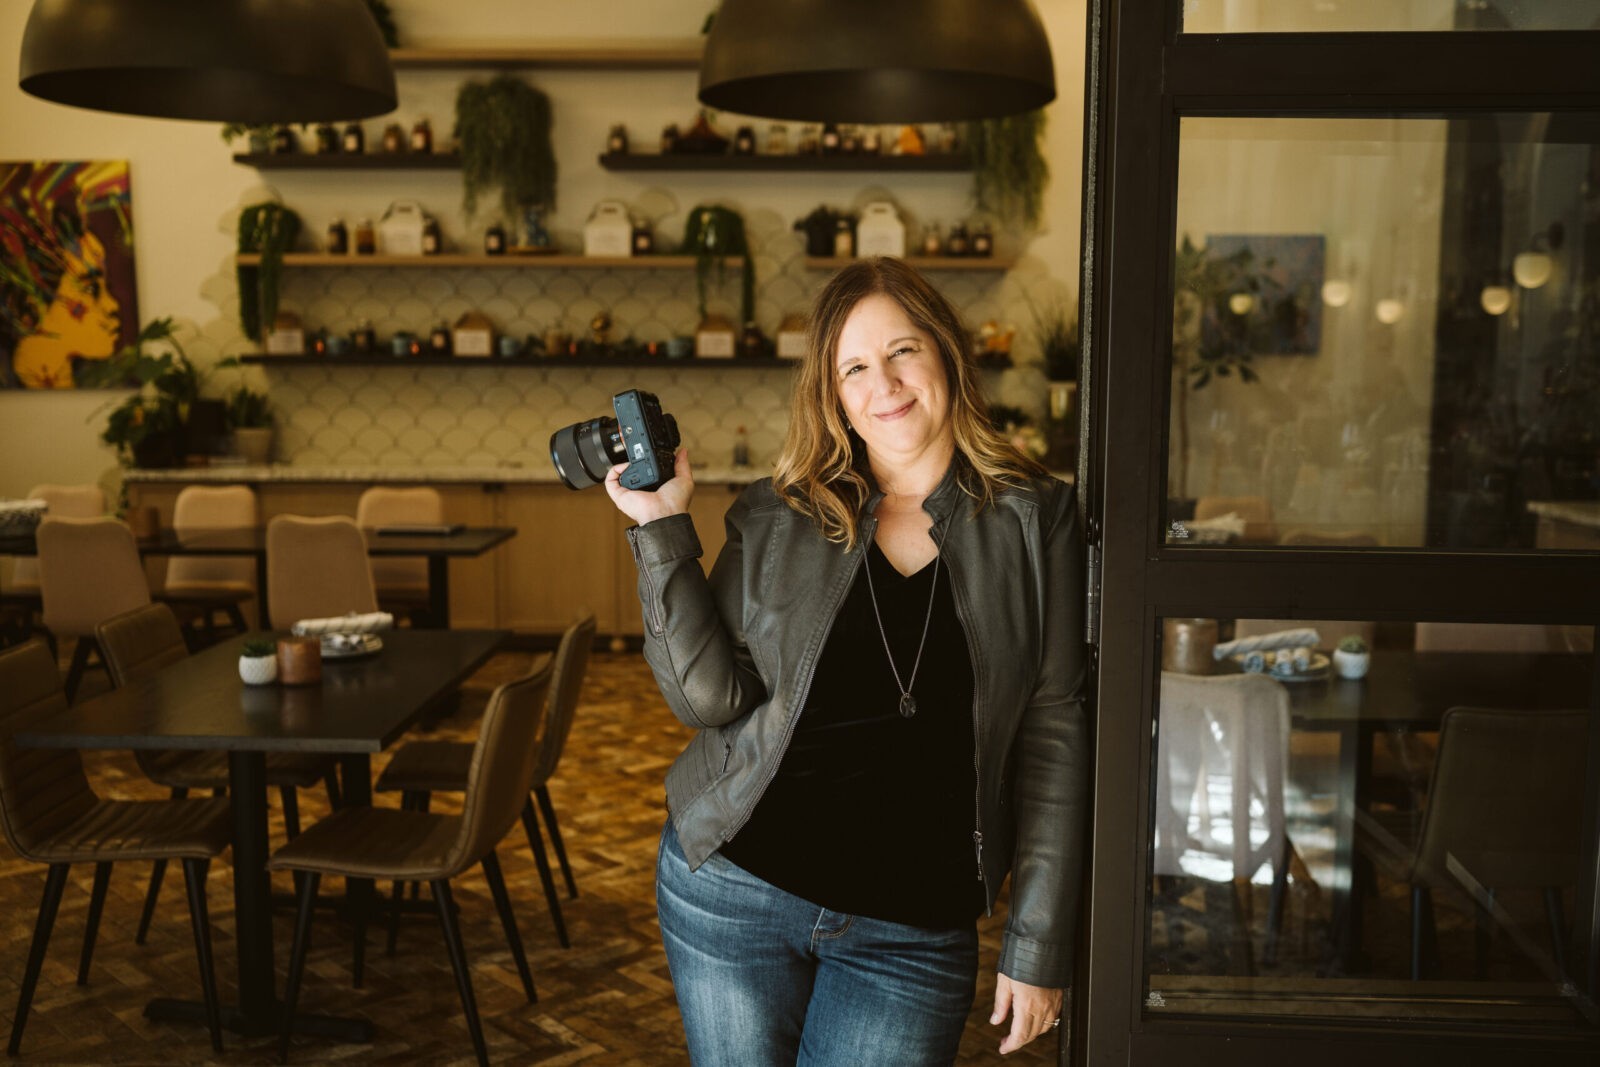 personal branding portrait of a photographer standing in a restaurant